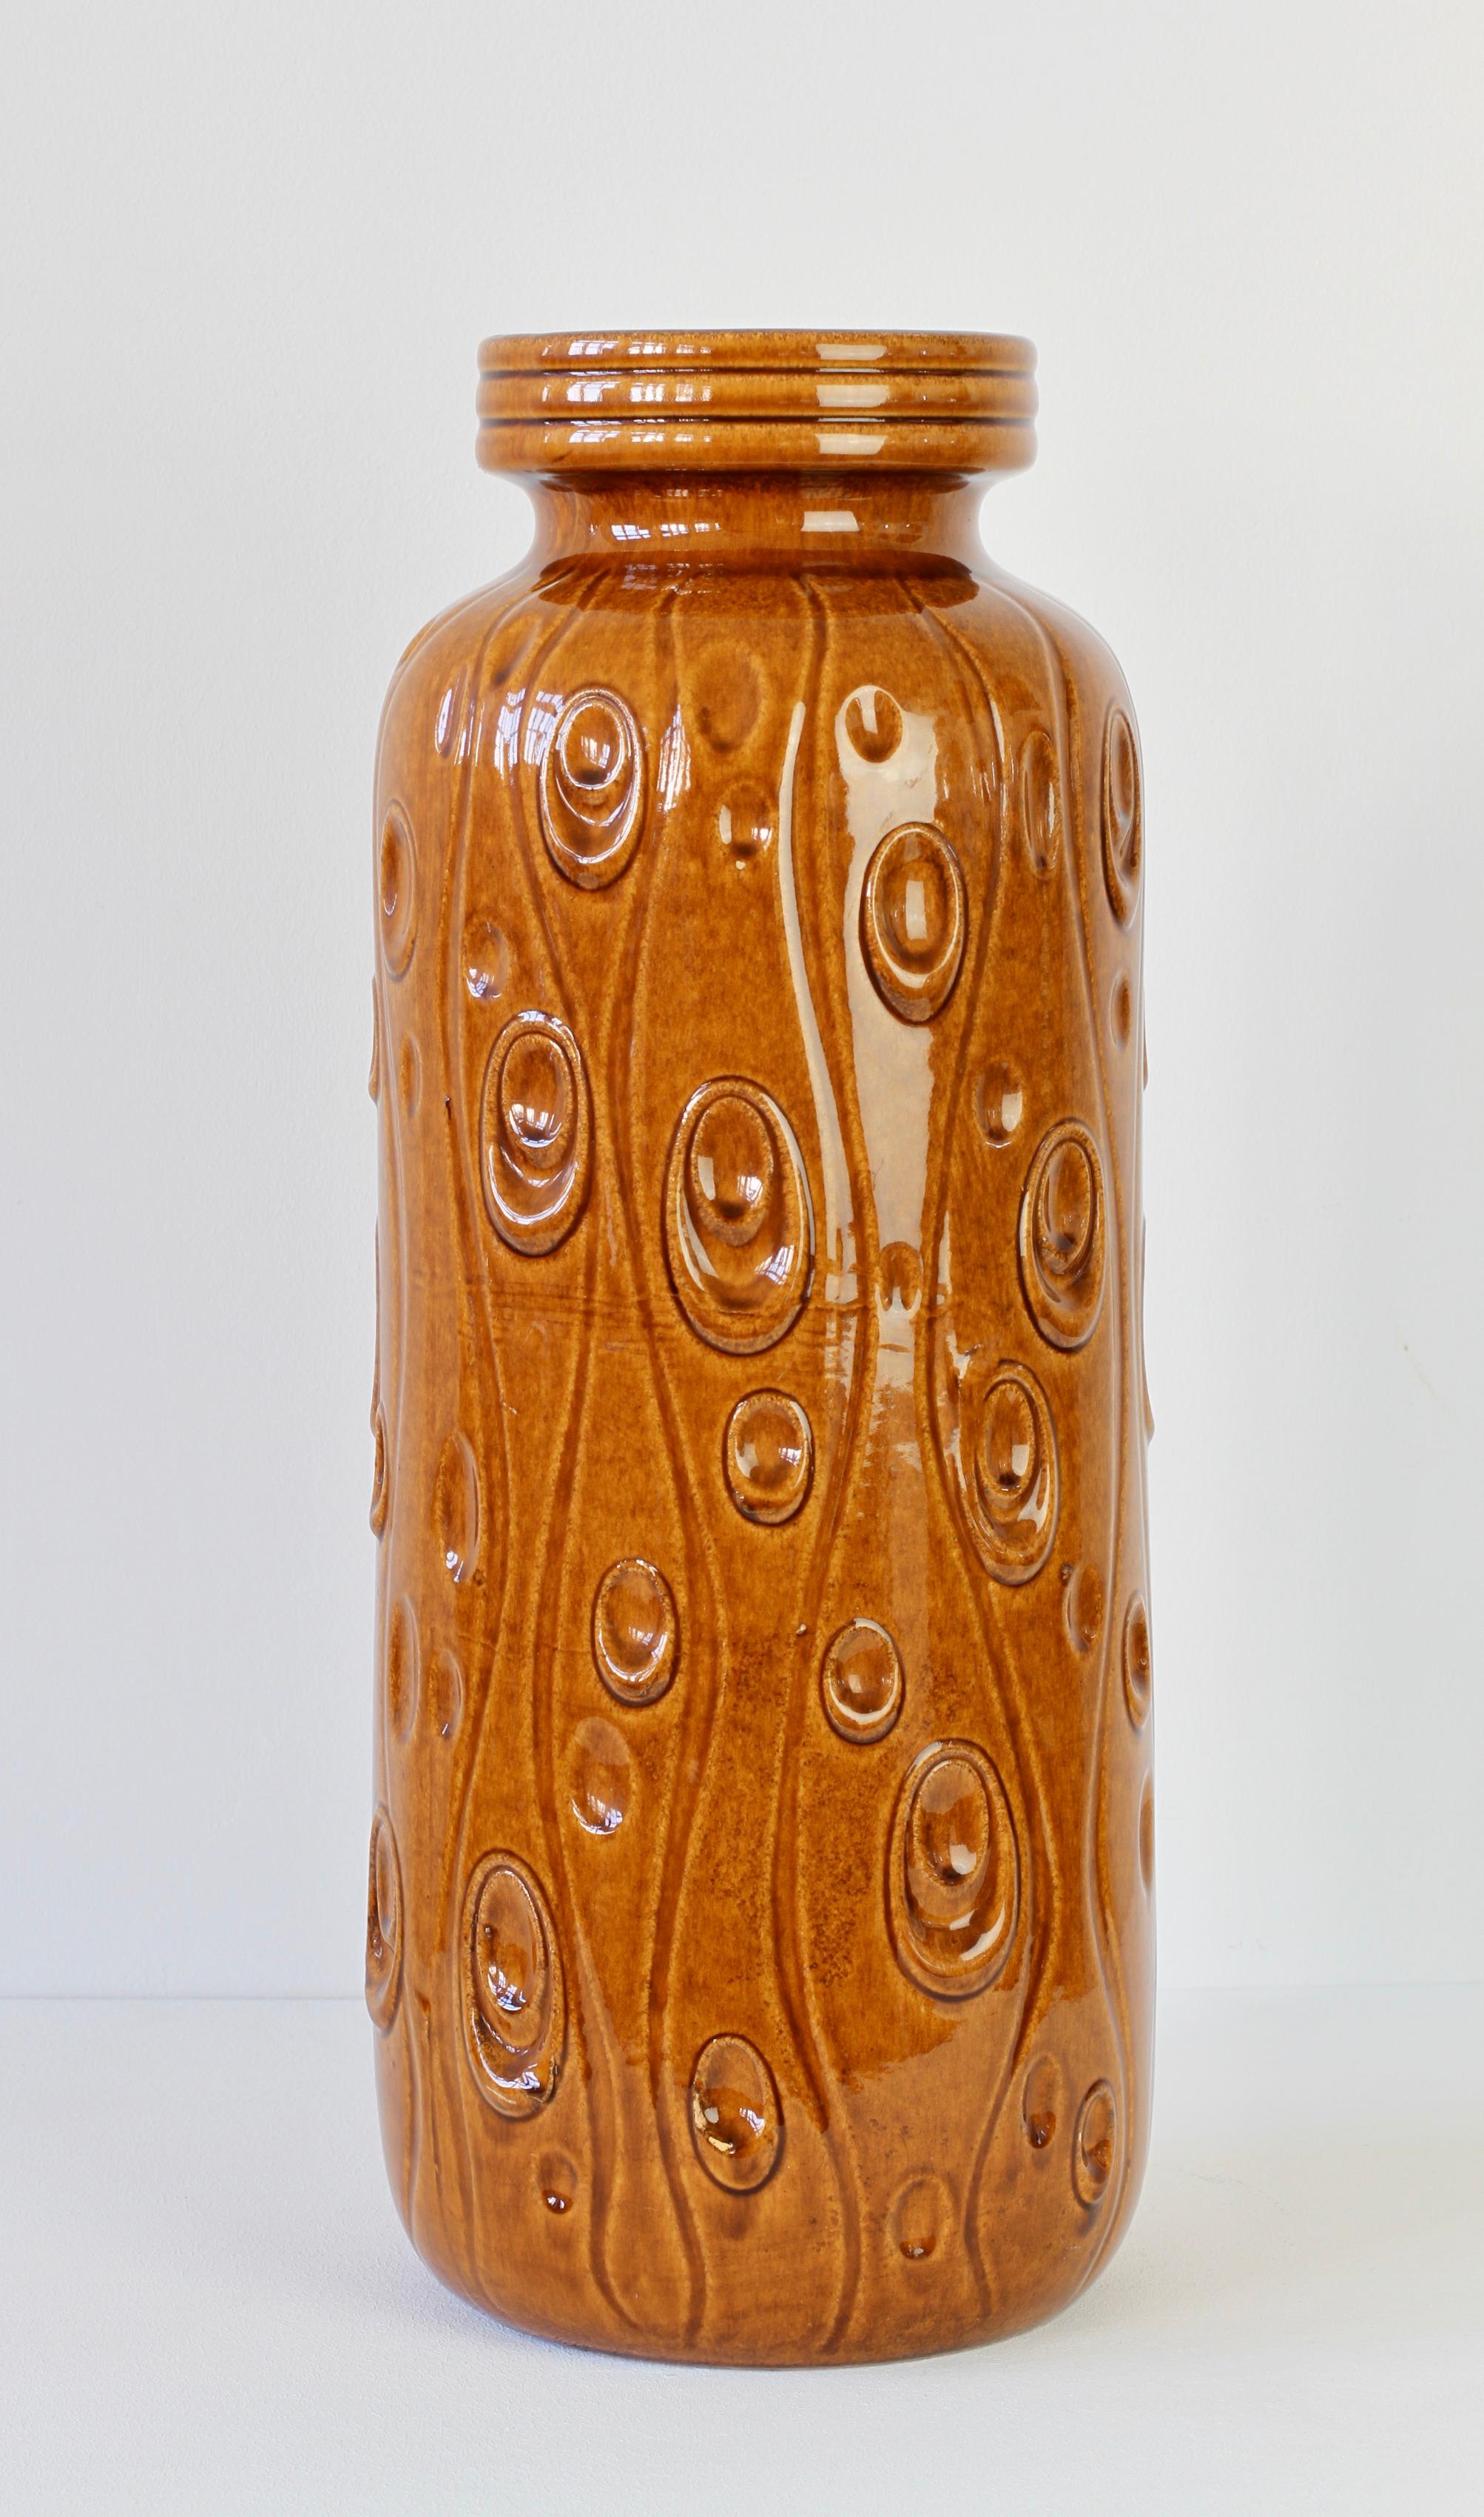 This tall collectable midcentury vintage floor vase was produced circa 1965 by the renowned producer of West German pottery - Scheurich Keramik. The vase features the 'Koralle' (Coral) relief pattern in a lovely amber brown color high gloss glaze.